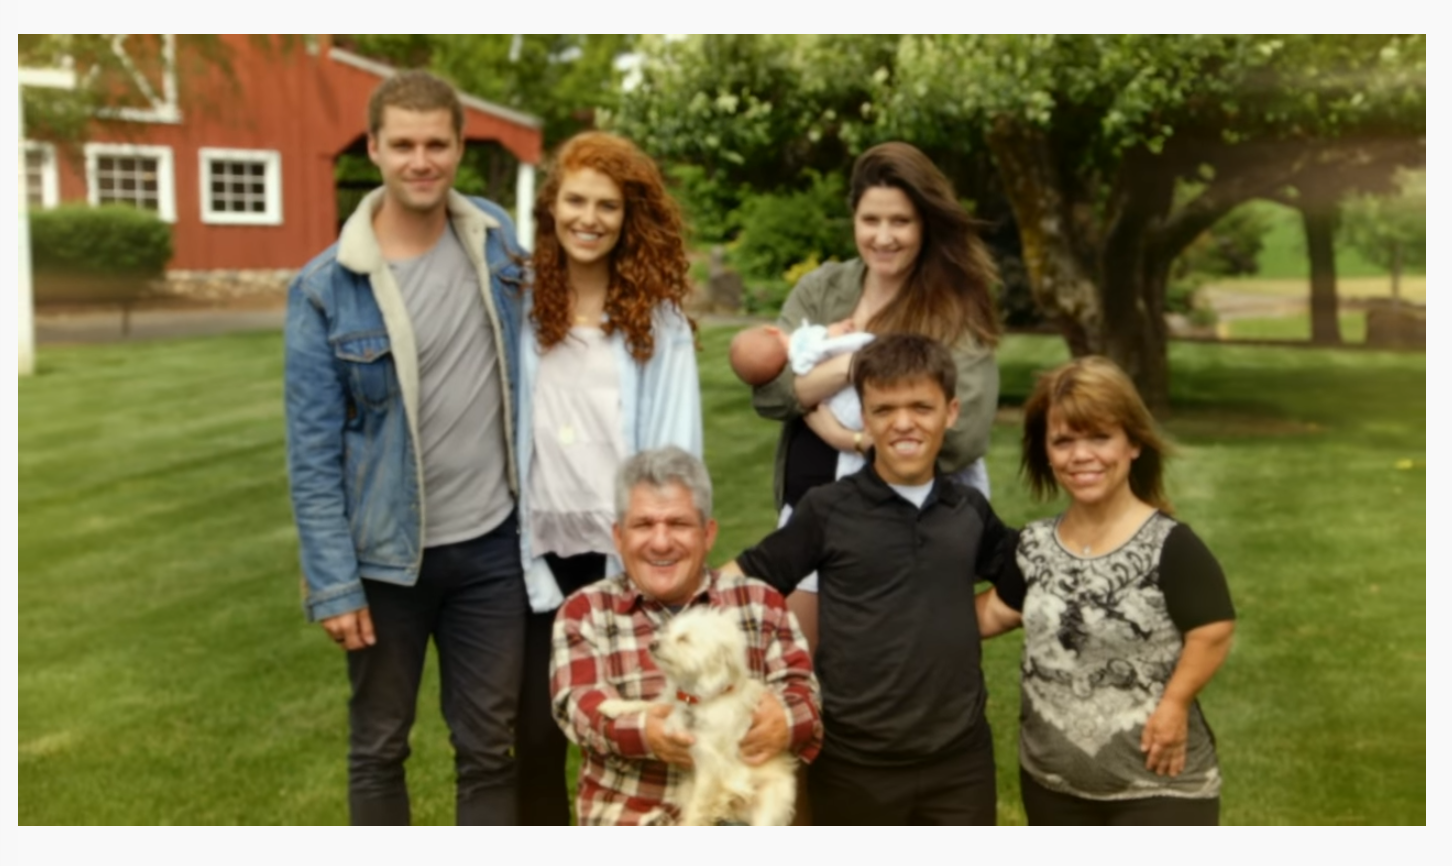 Little Family, Big Values, Book by The Roloff Family